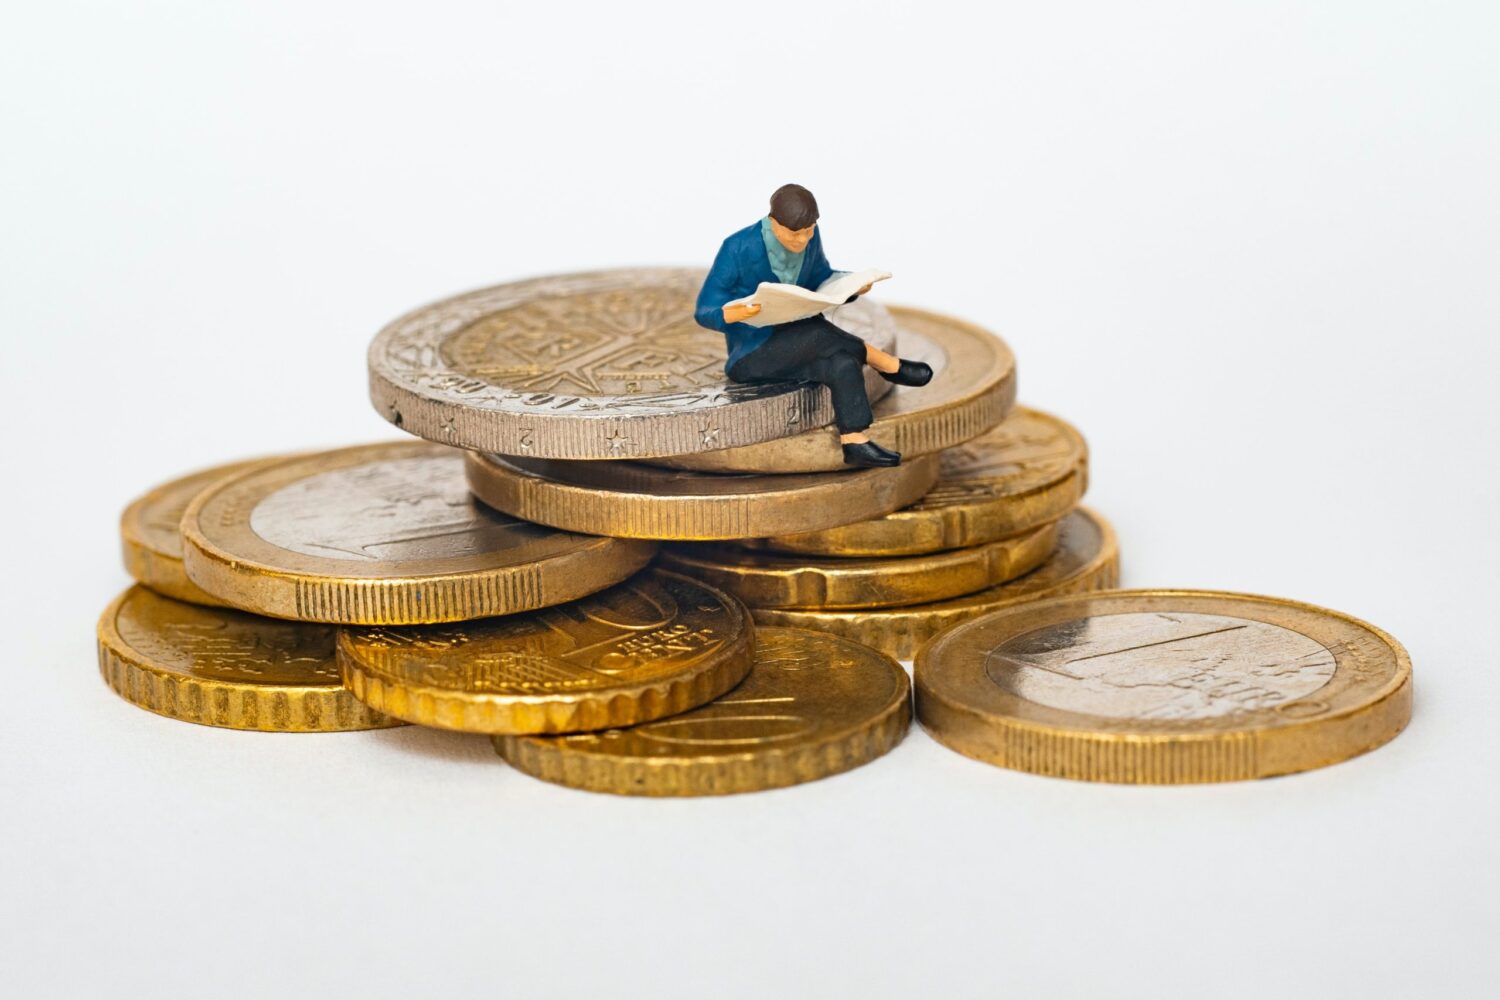 Miniature man with legs crossed sitting on a stack of large golden coins